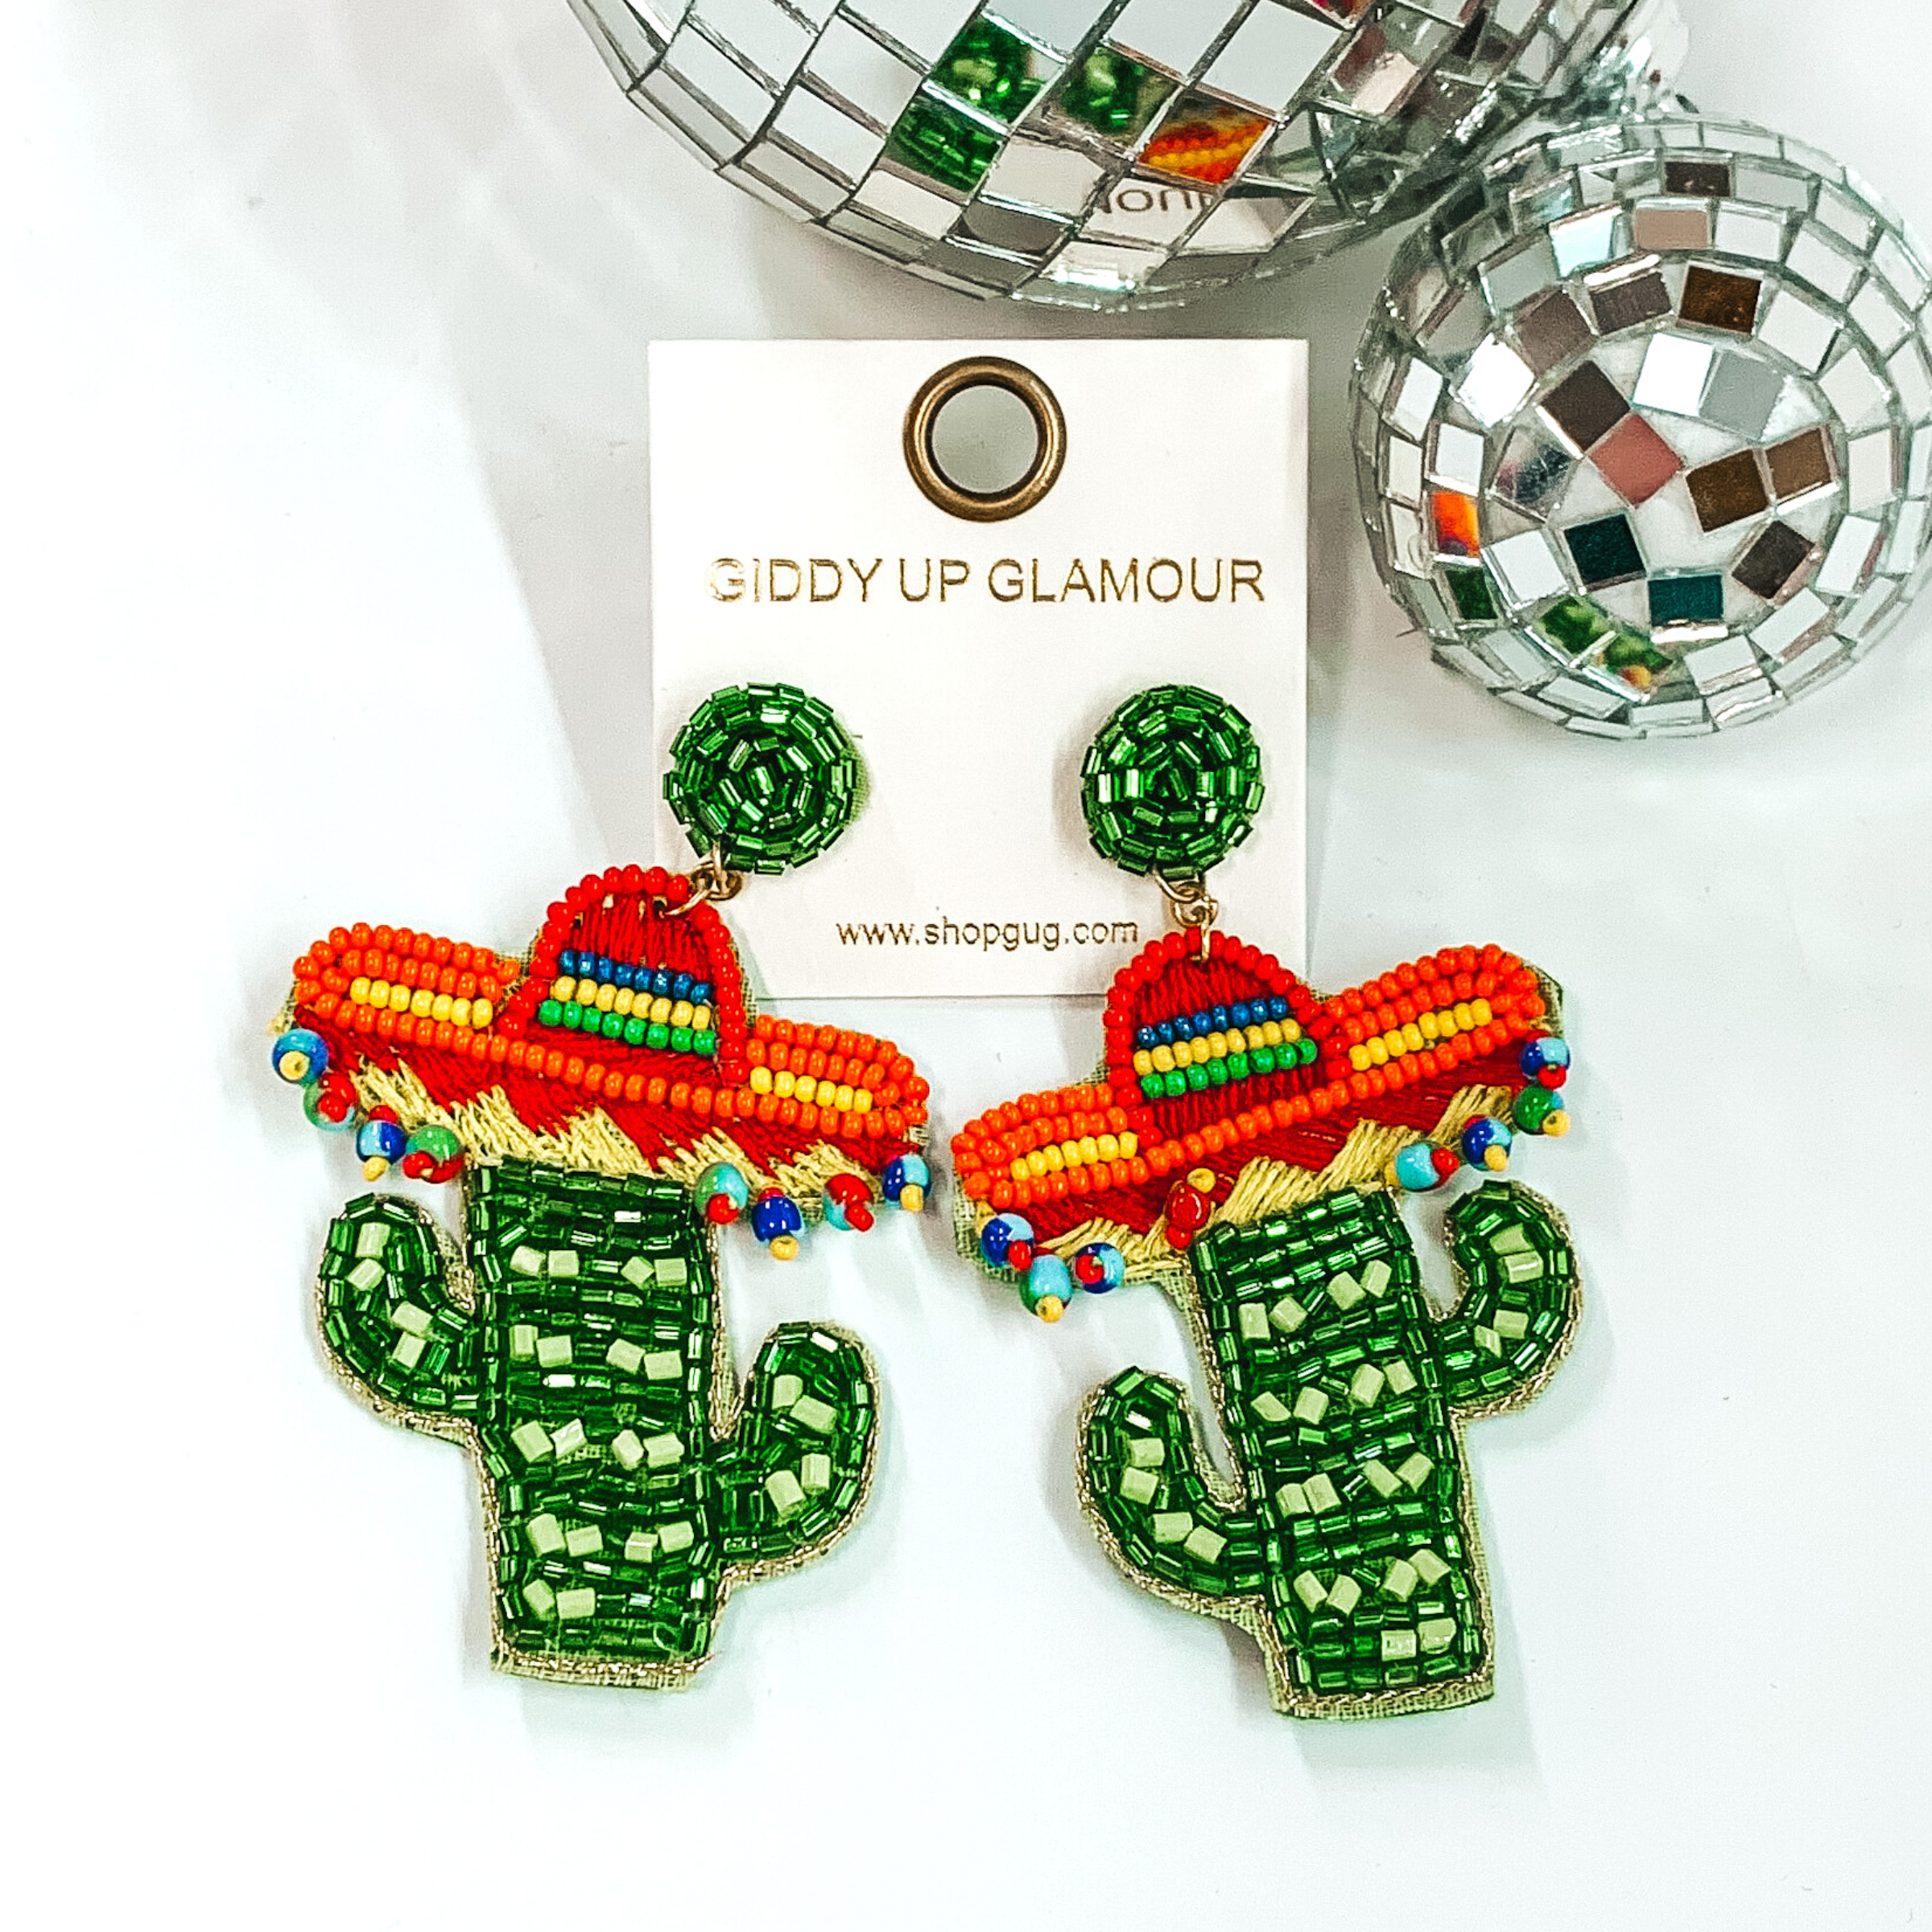 These earrings are beaded cactus earrings in light and dark green. the cactus has a colorful sombrero on the top of the cactus. The cactus pendant is hanging from a green, beaded circle stud. These earrings are pictured on a white background with disco balls in the top right corner.